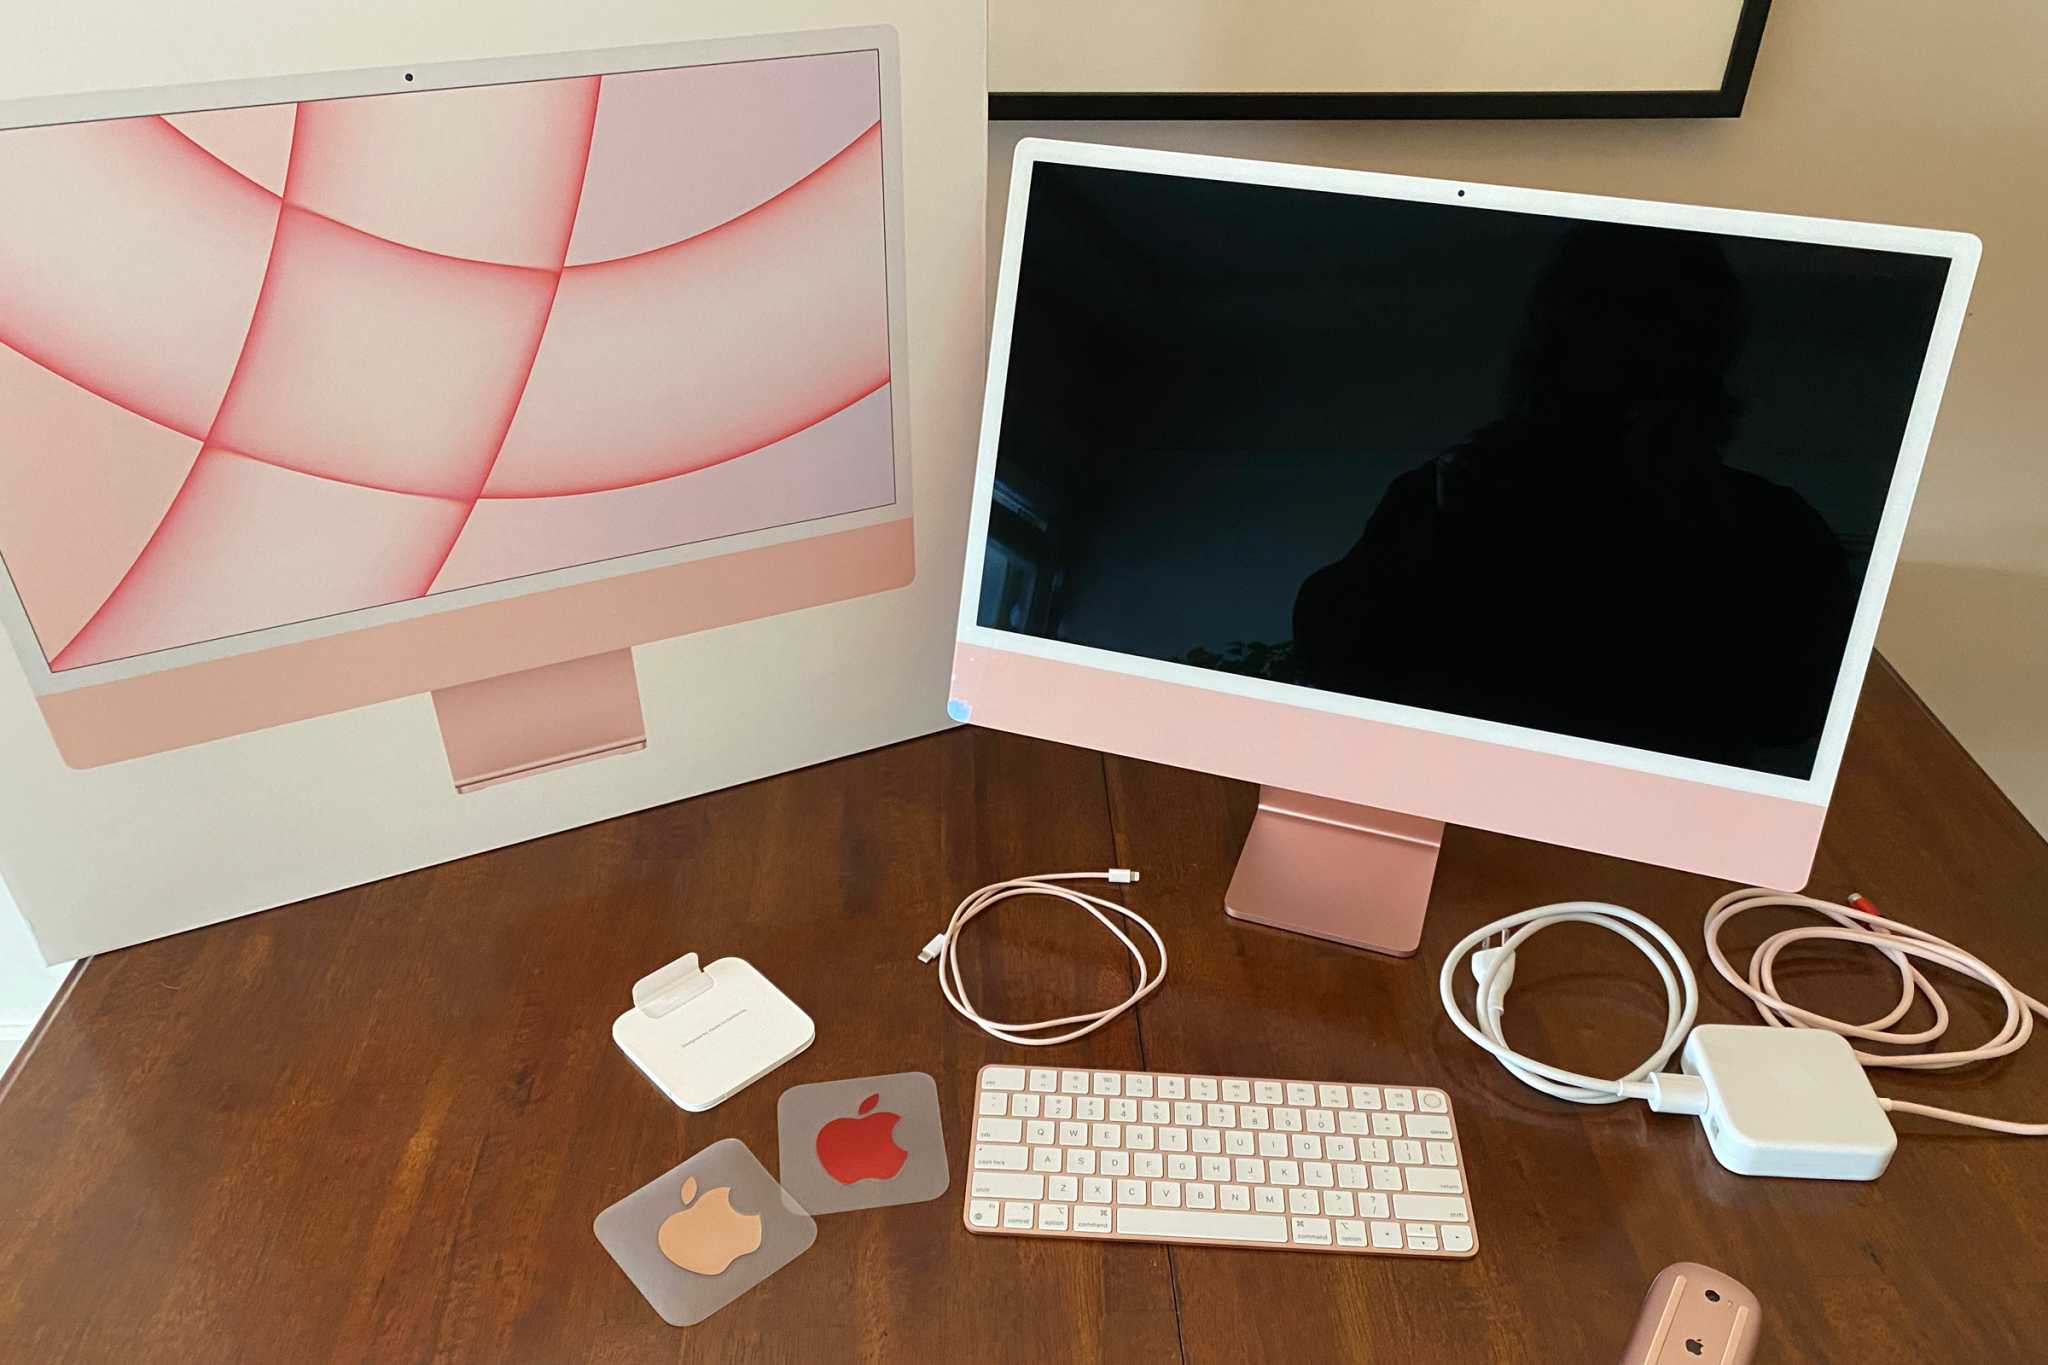 Handson with the 24inch iMac Simply inside and out (of the